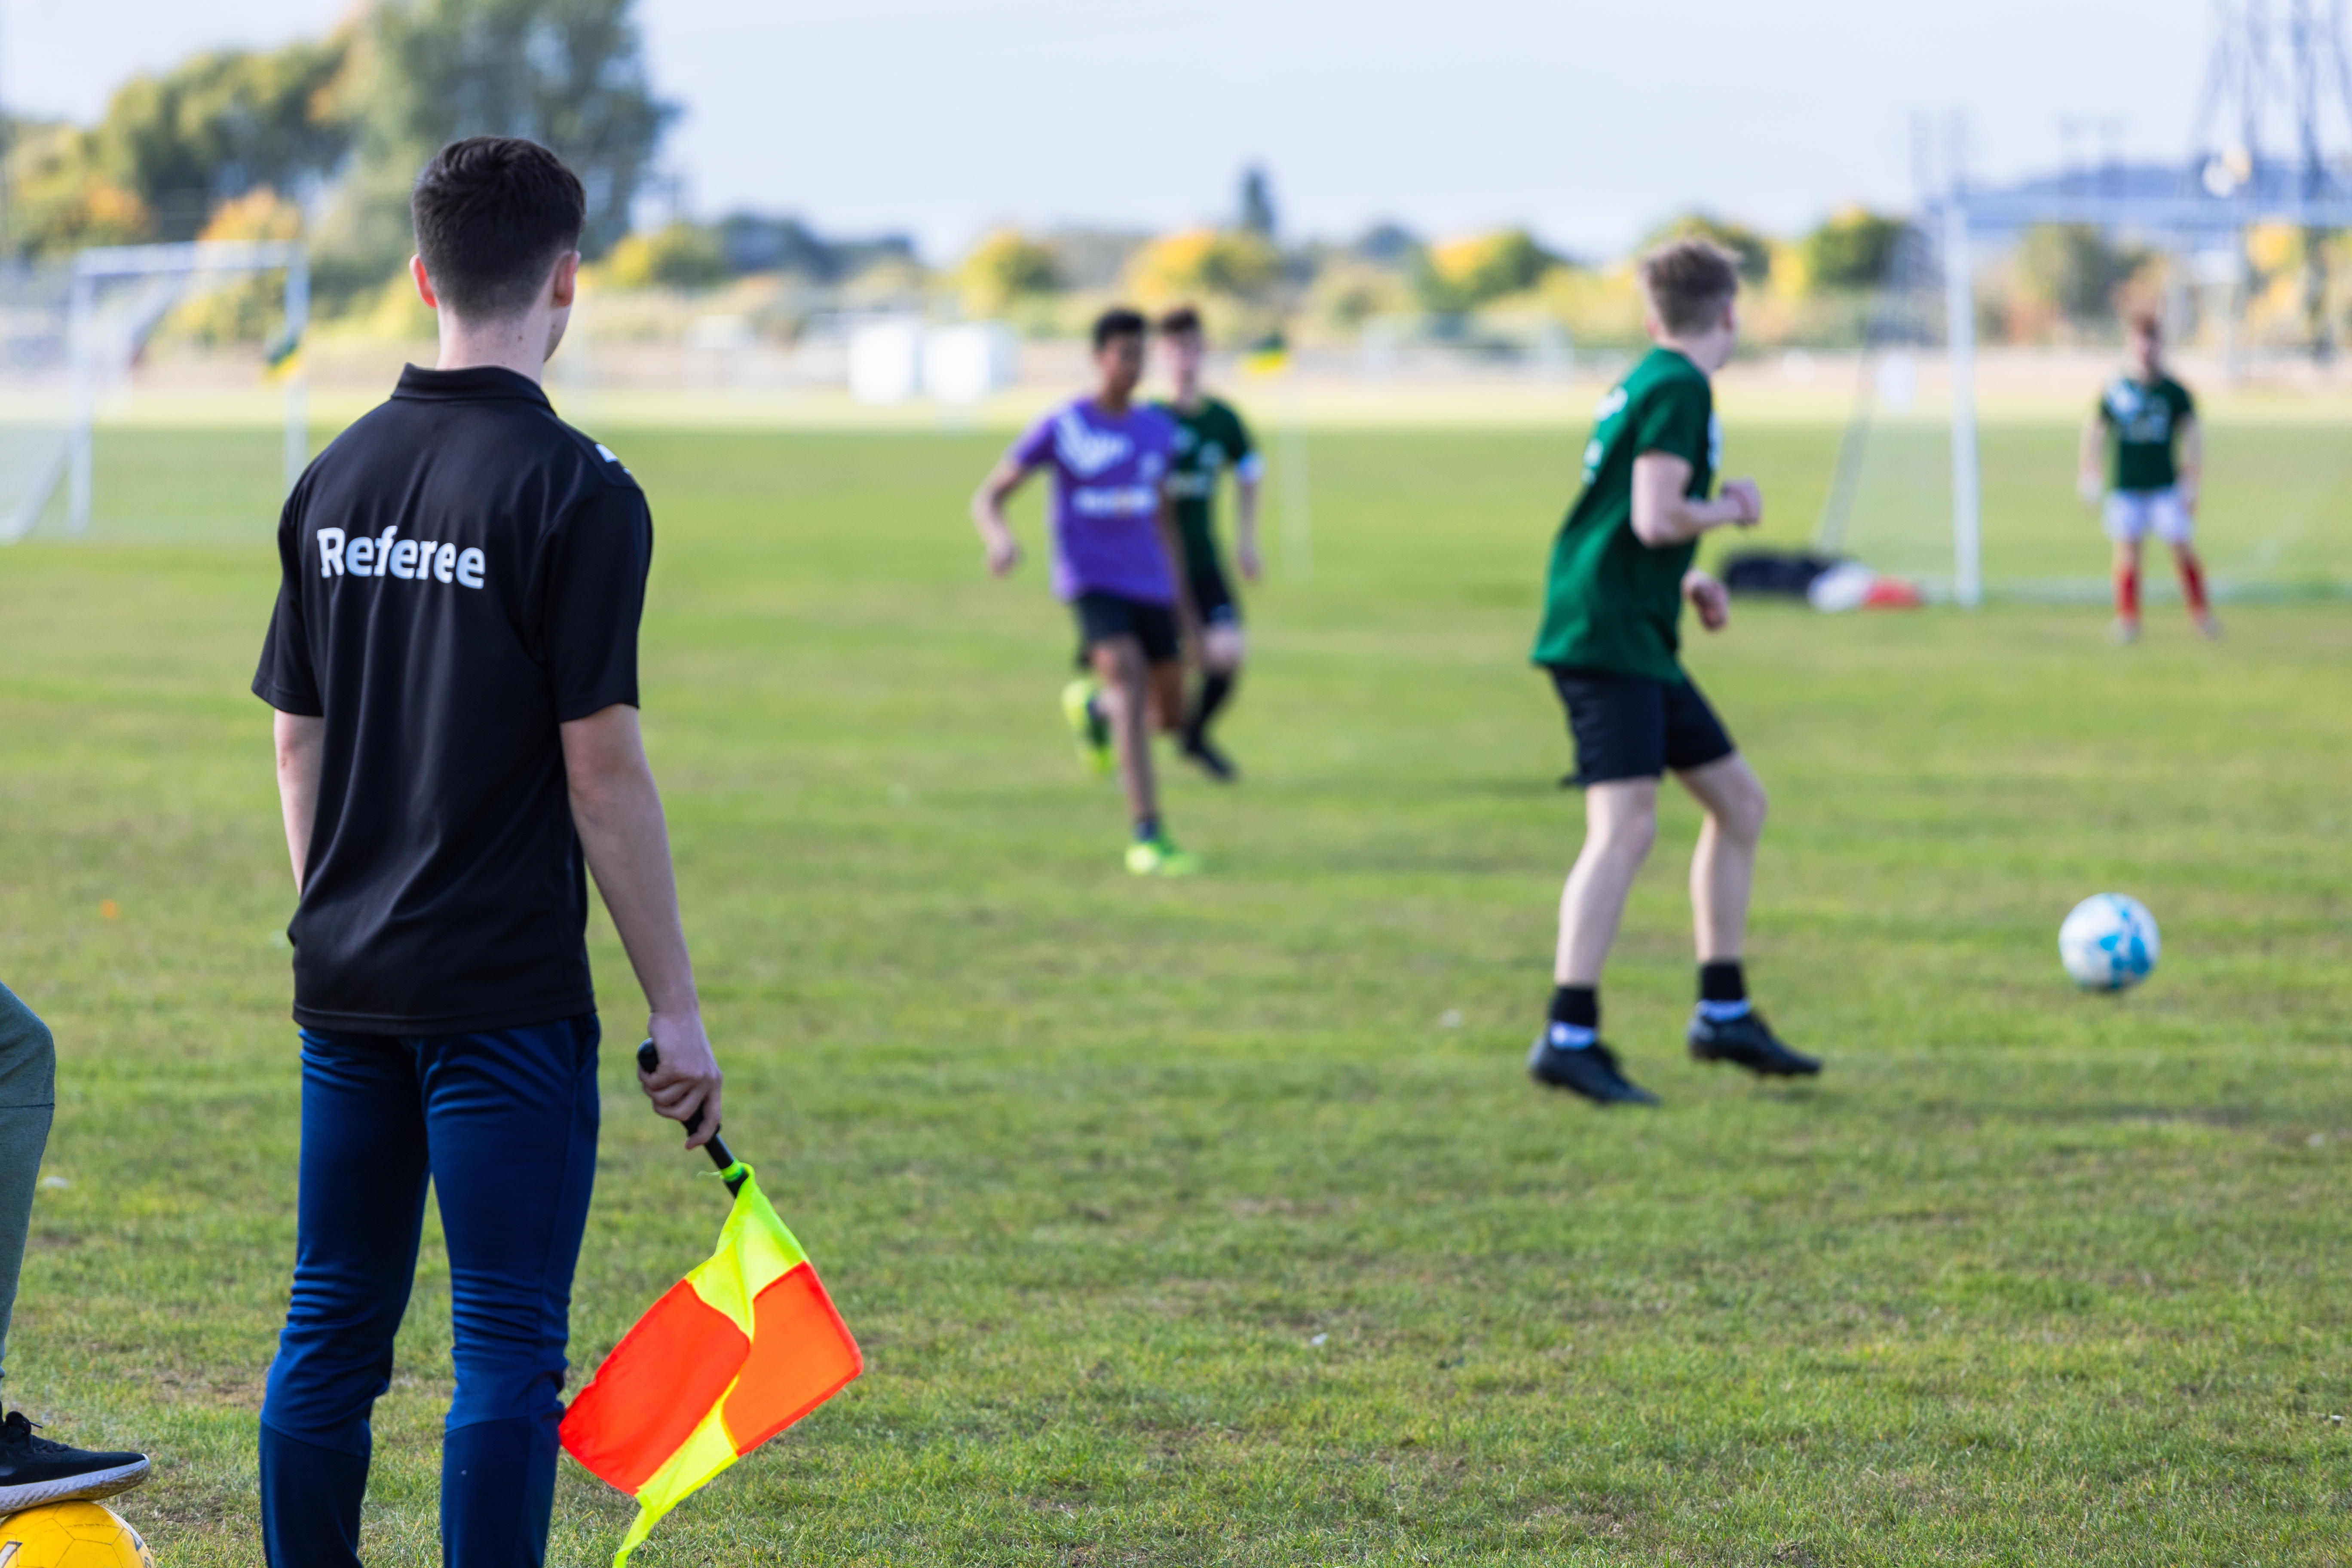 Become a referee or umpire